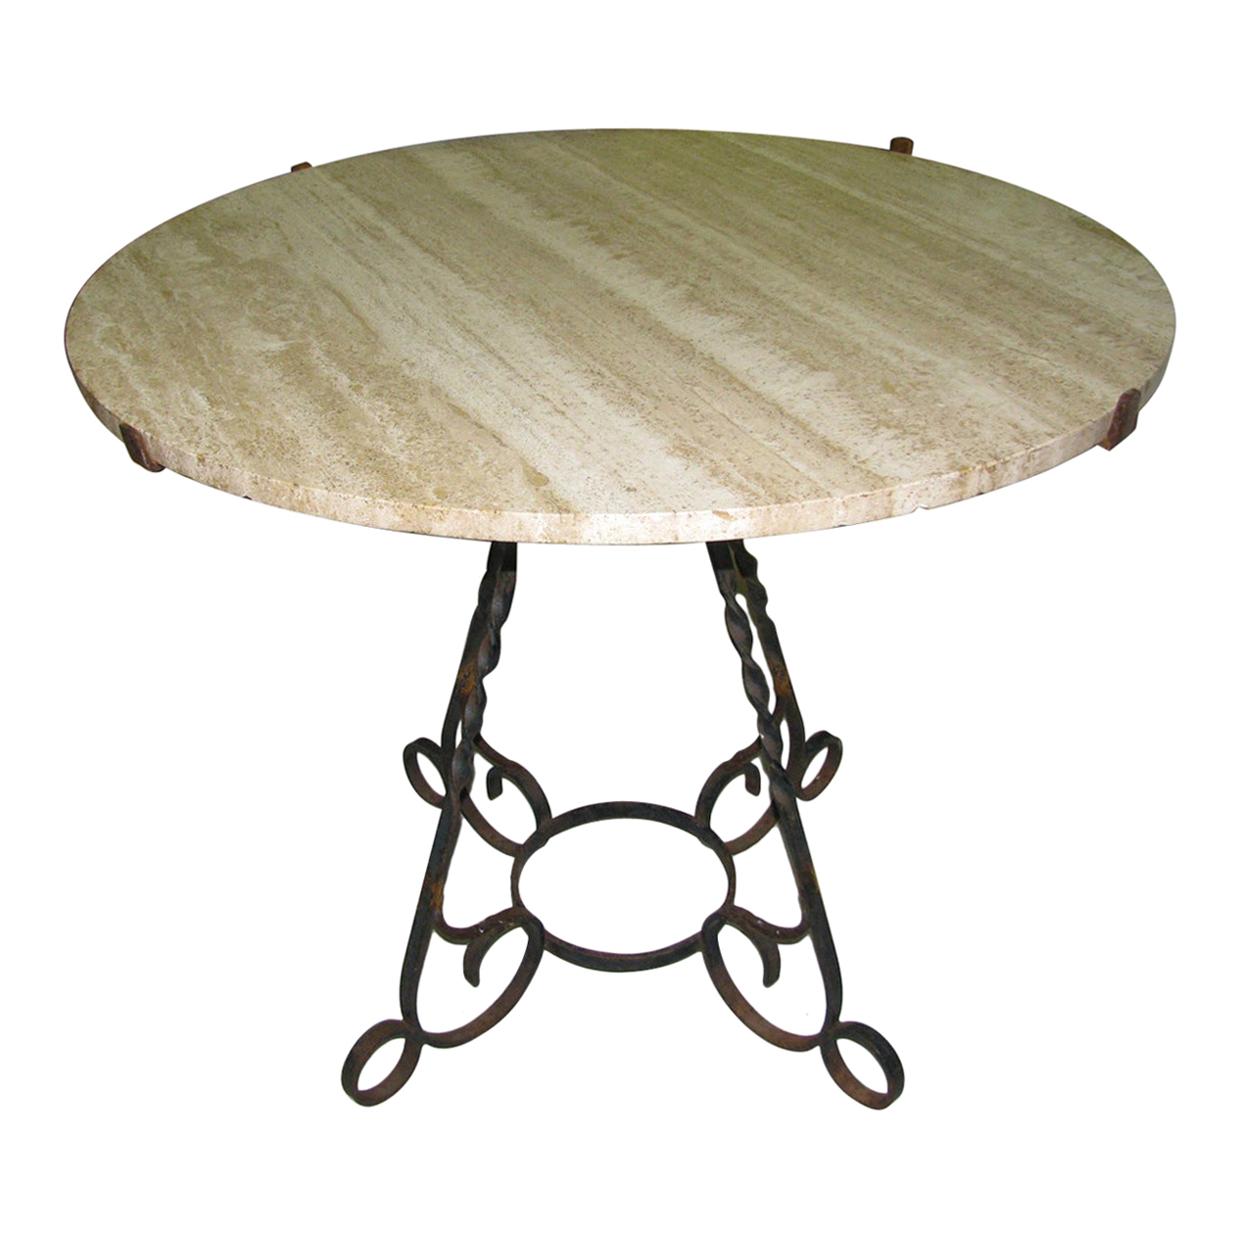 Italian Travertine Stone Round Top with Wrought Iron Base Dining Table